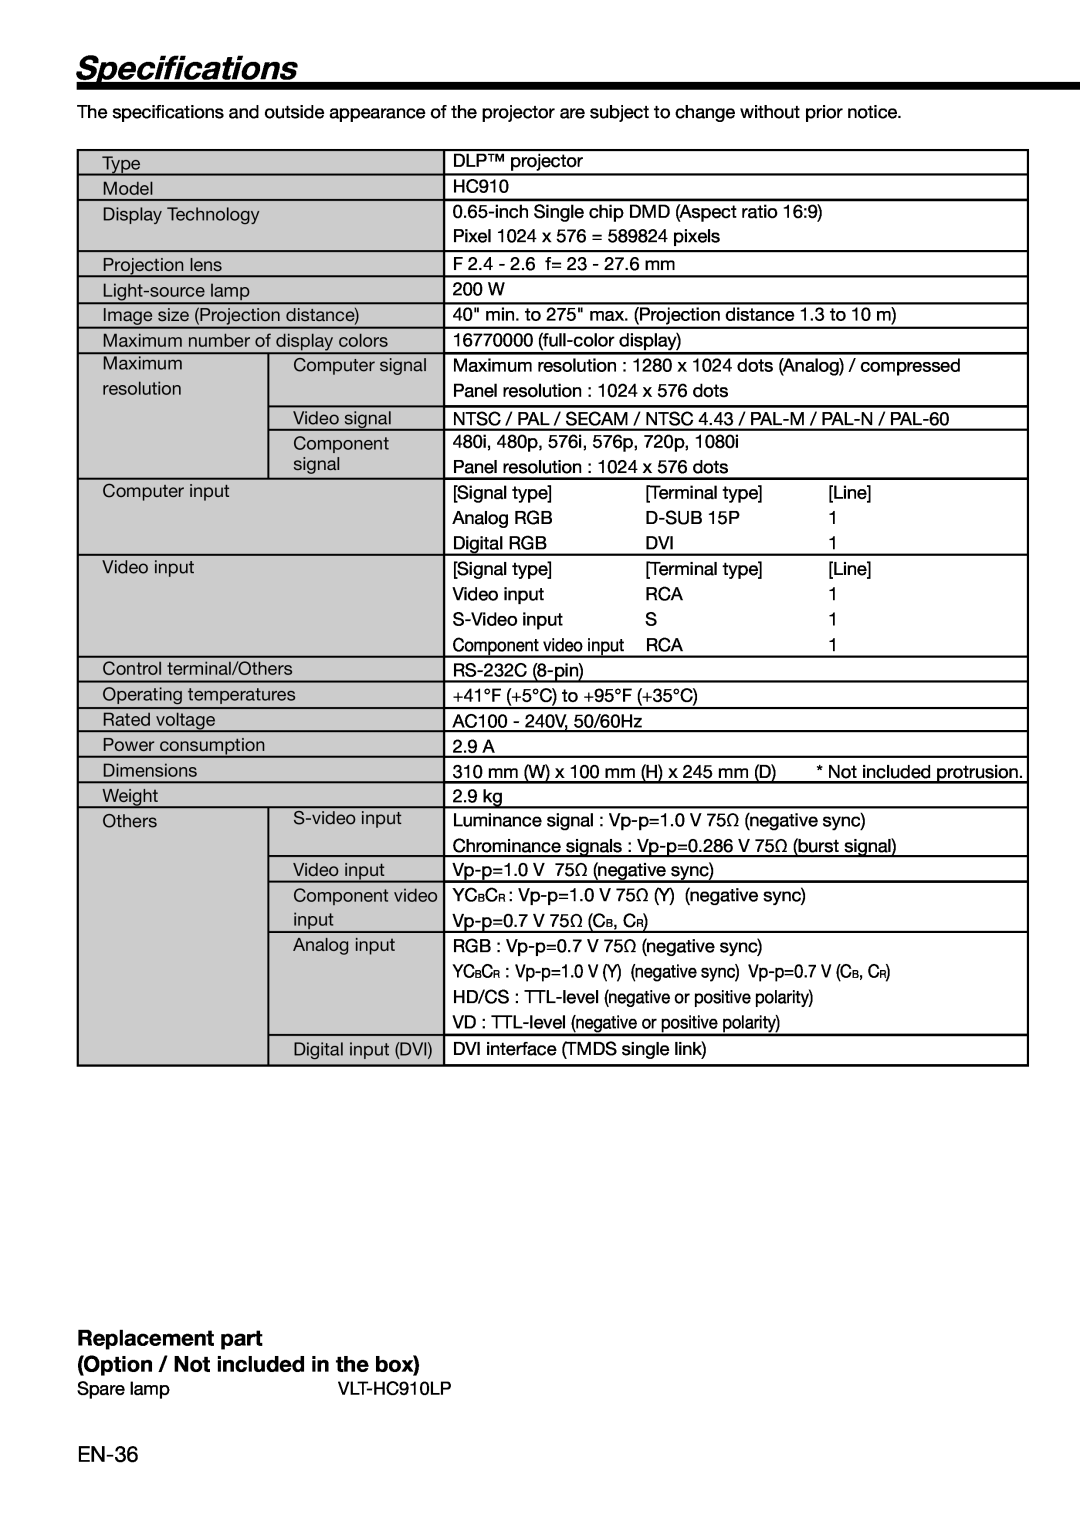 Mitsubishi Electronics HC910 user manual Speciﬁcations, Replacement part Option / Not included in the box 